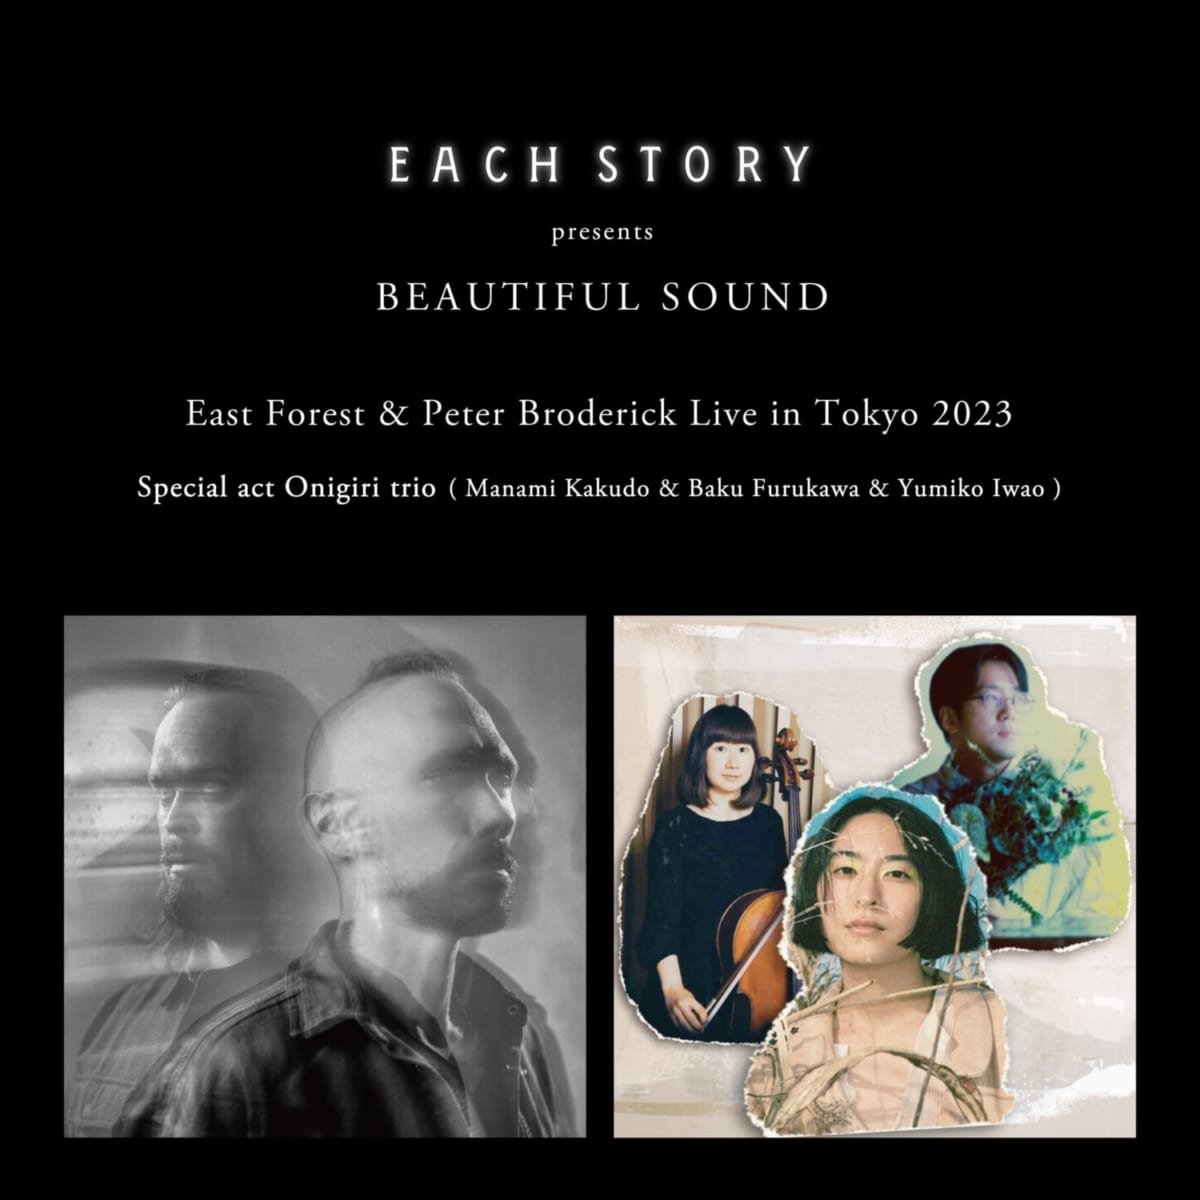 East Forest & Peter Broderick